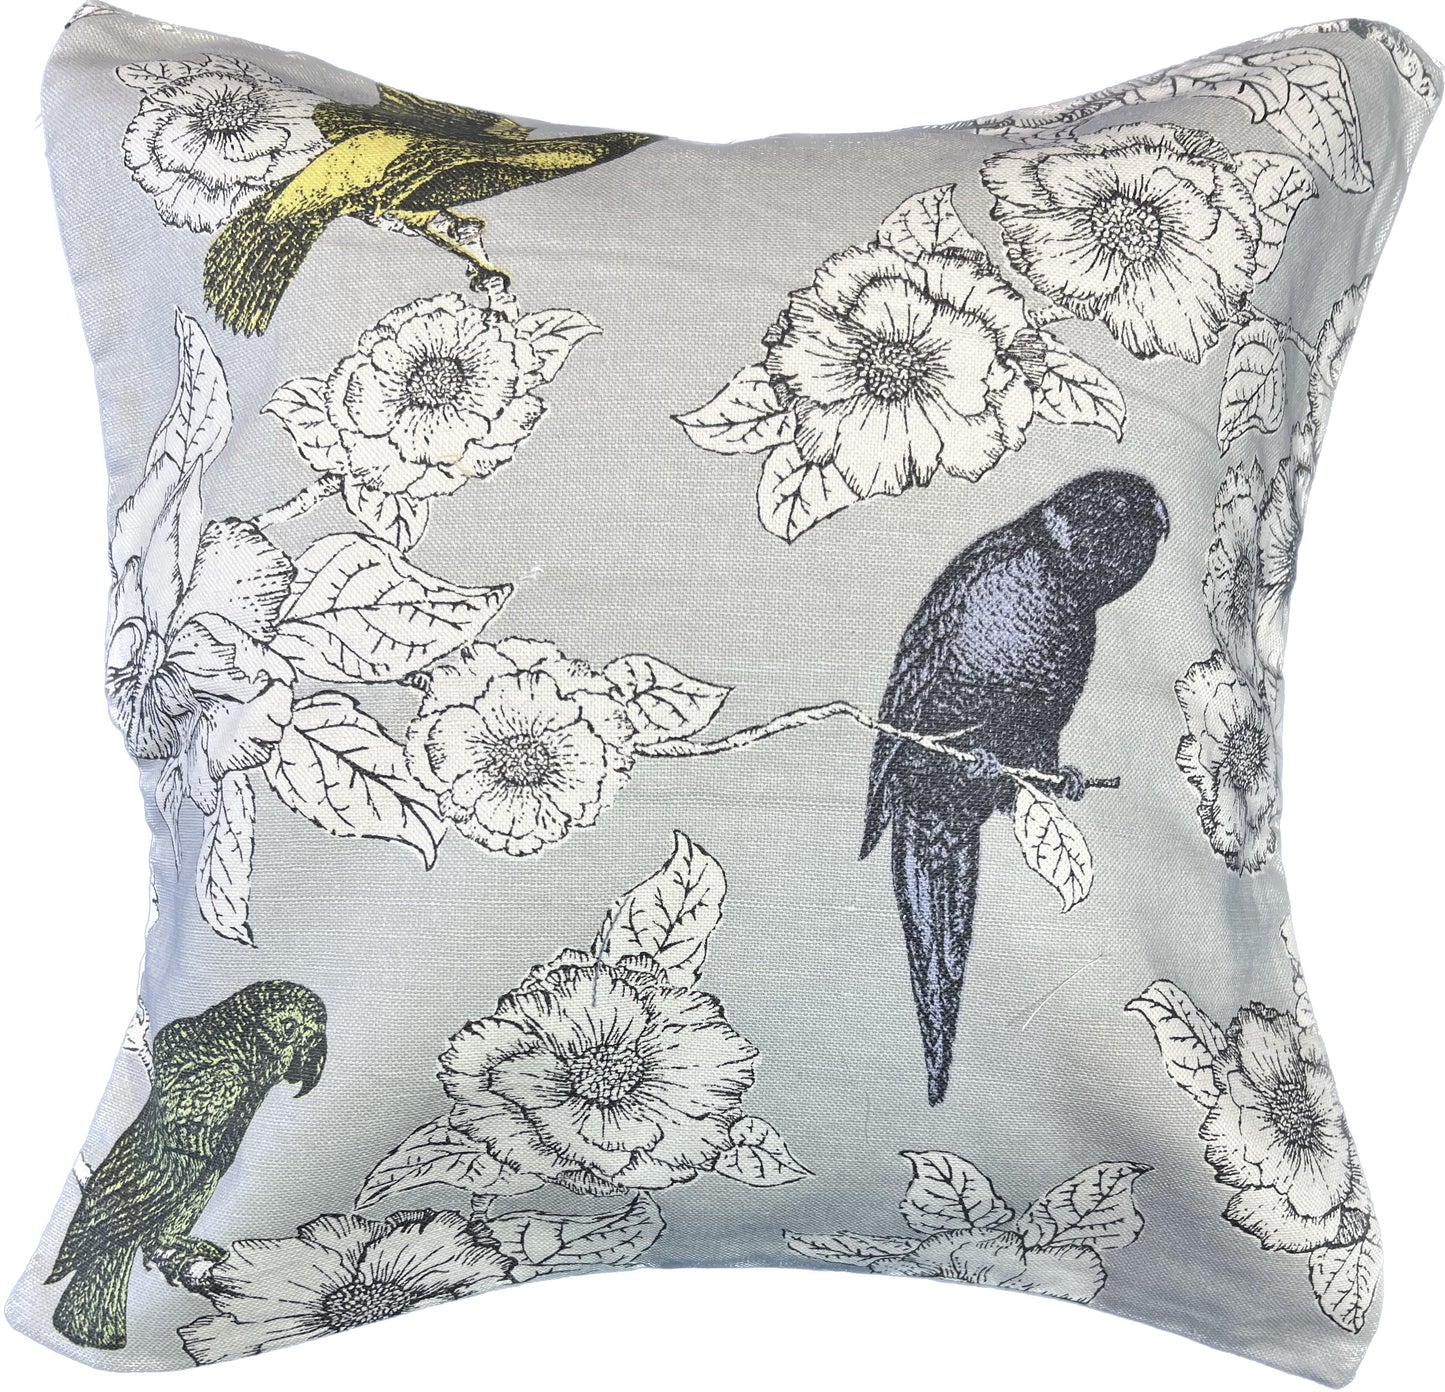 18"x18"  2-Sided Pillow Cover - Face: Birds & Flowers / Back: Solid